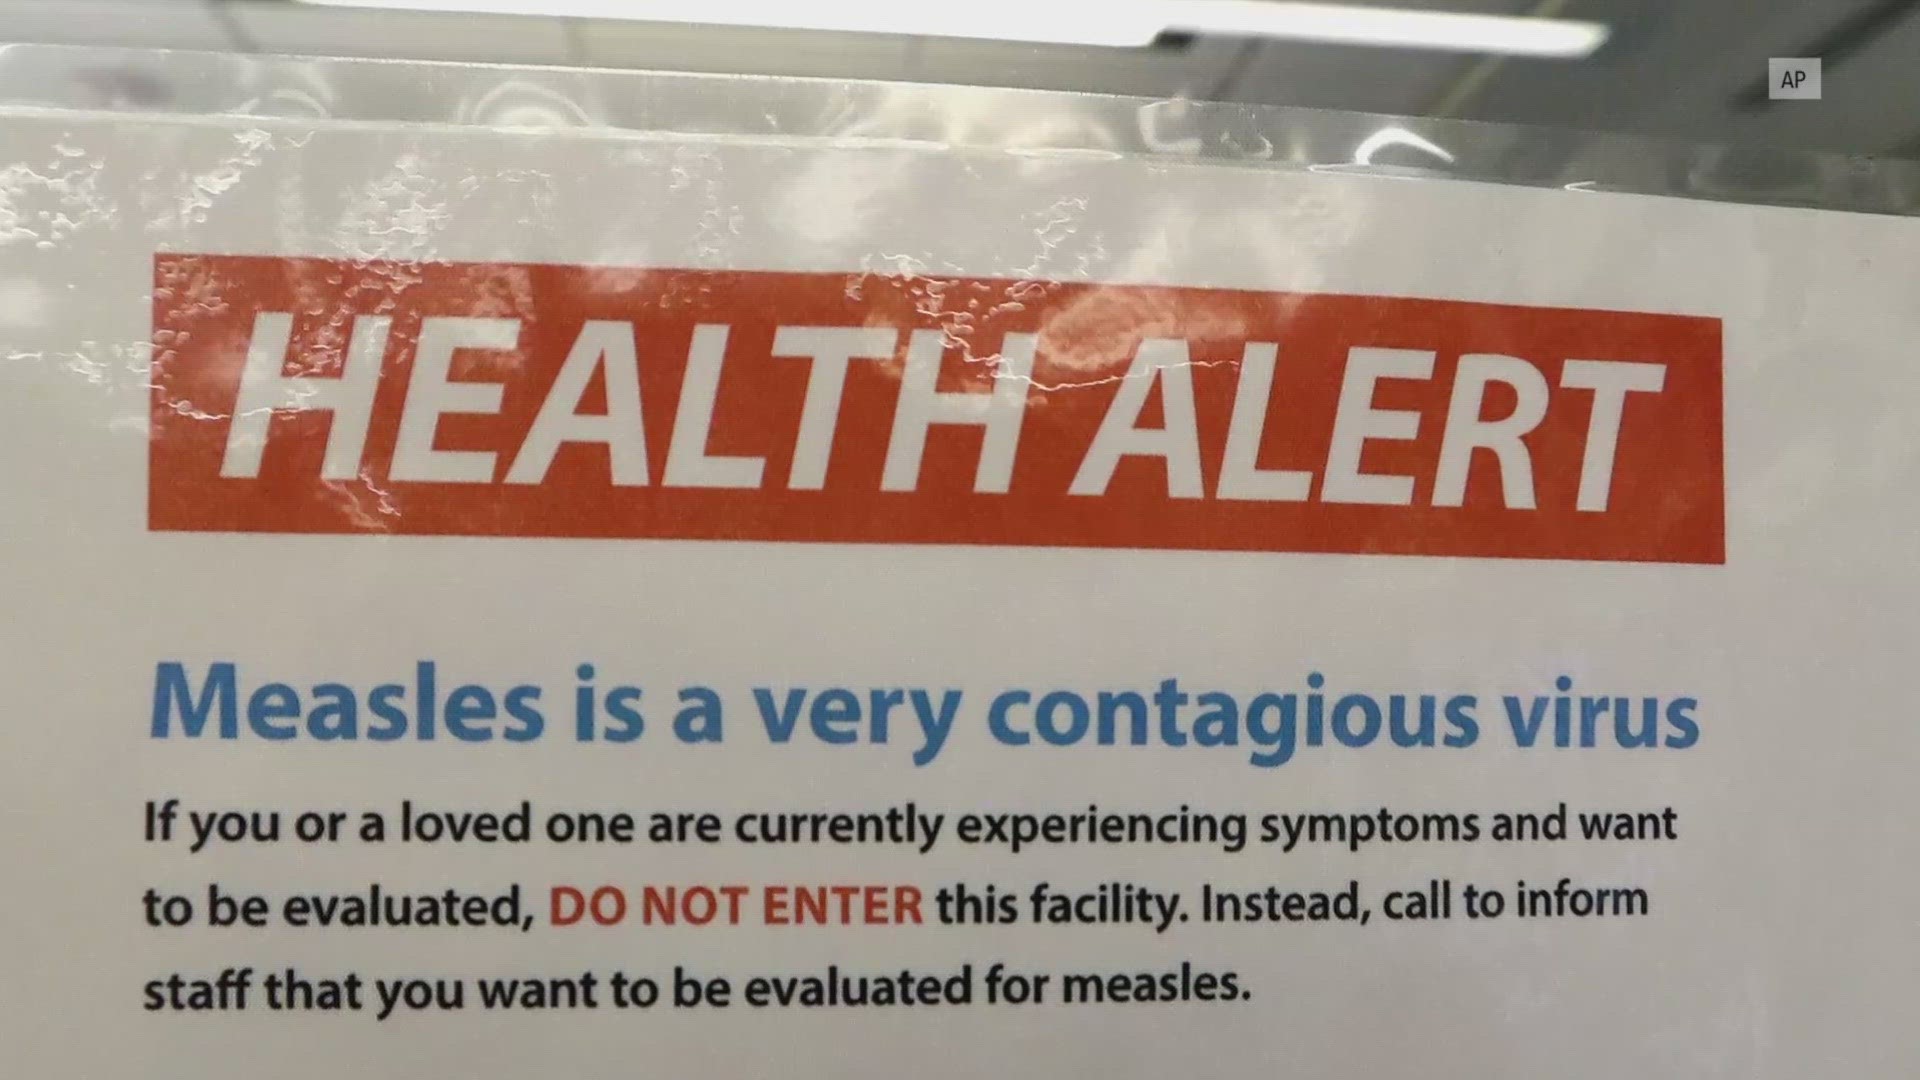 Measles is a highly contagious viral illness that’s often serious for small children but can be prevented by vaccination.